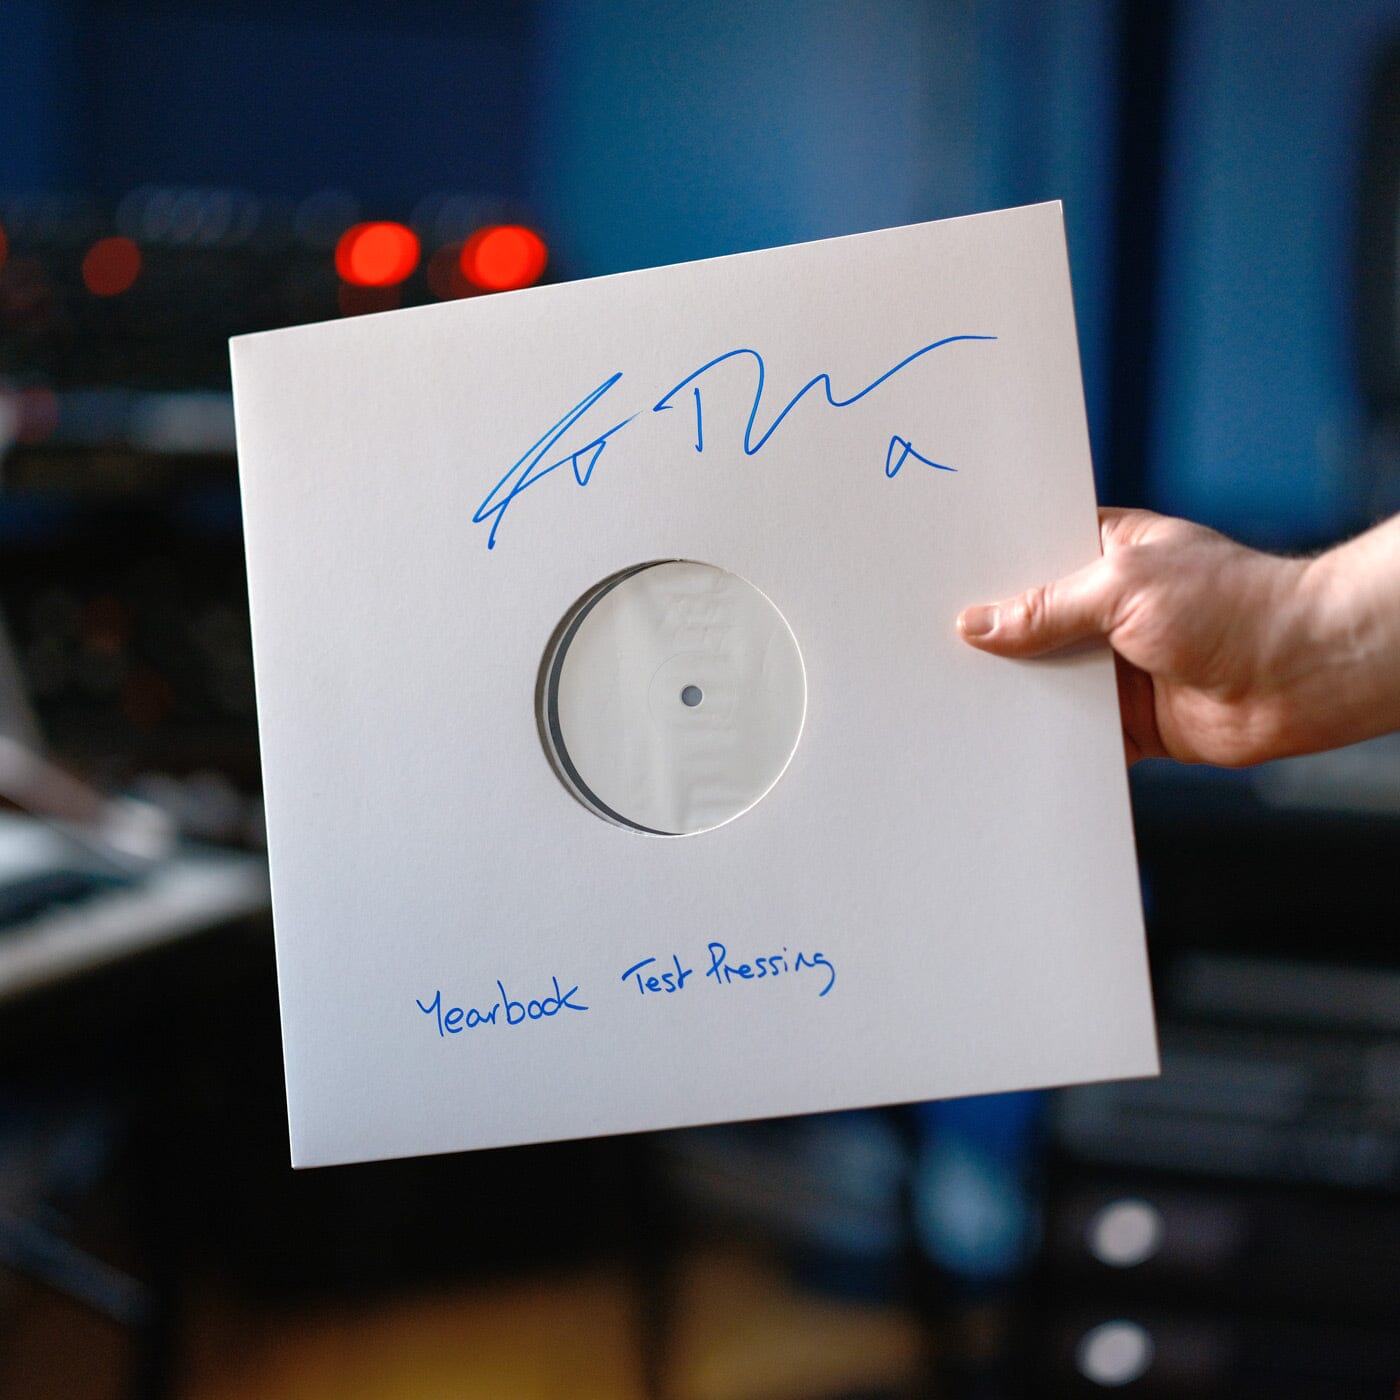 Yearbook - Signed & Numbered Test Pressing | RJ Thompson | Official Website & Store